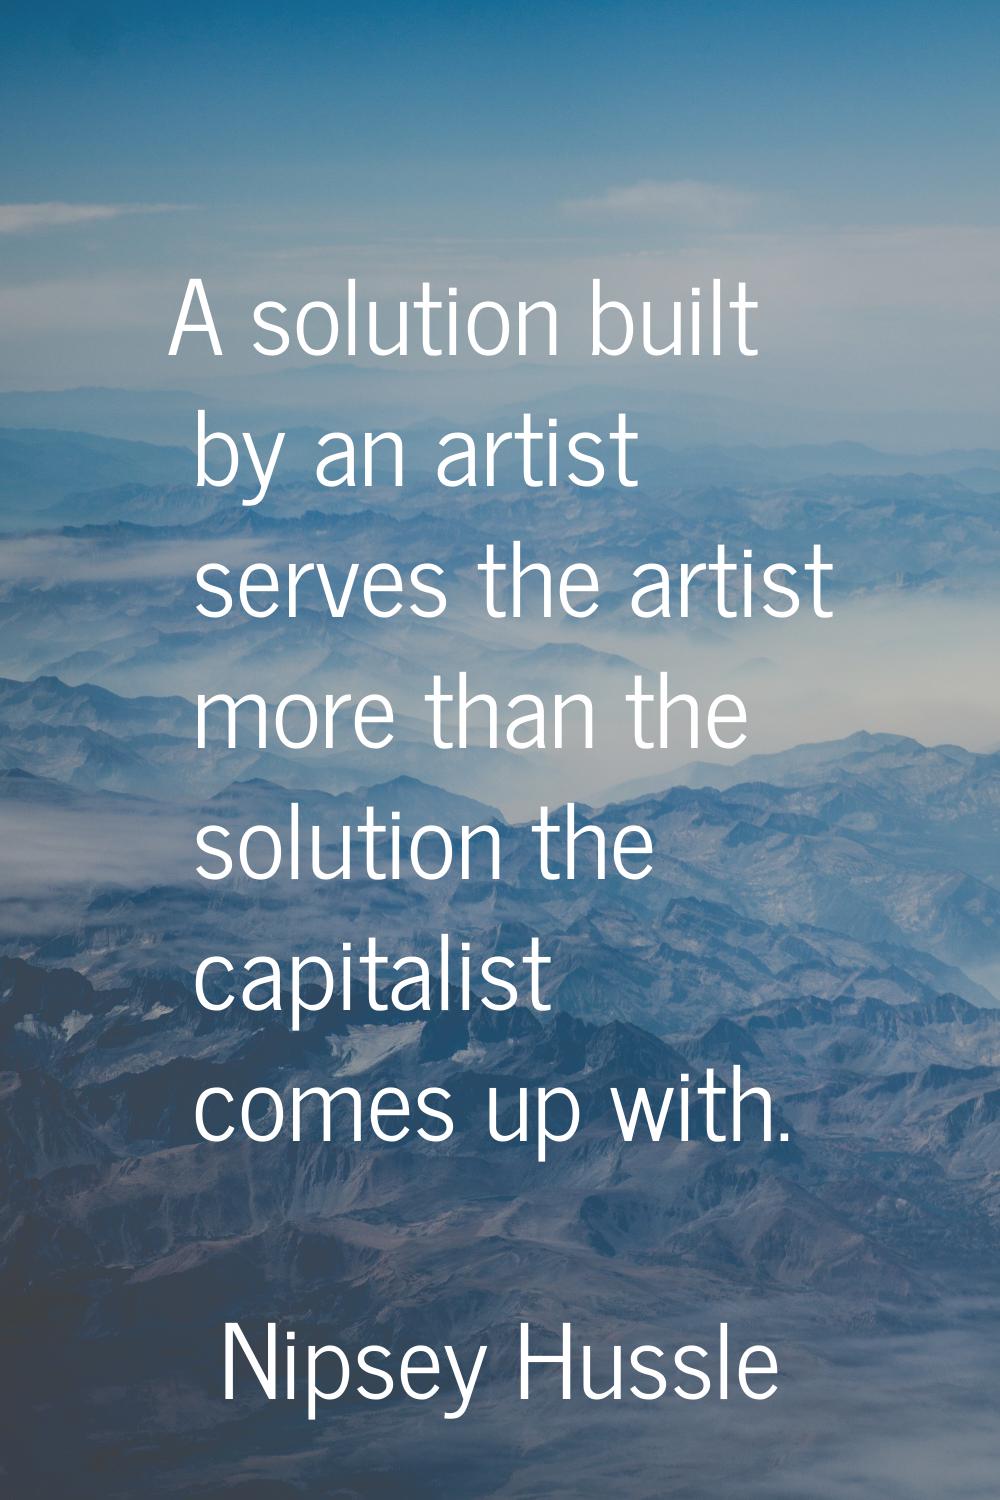 A solution built by an artist serves the artist more than the solution the capitalist comes up with